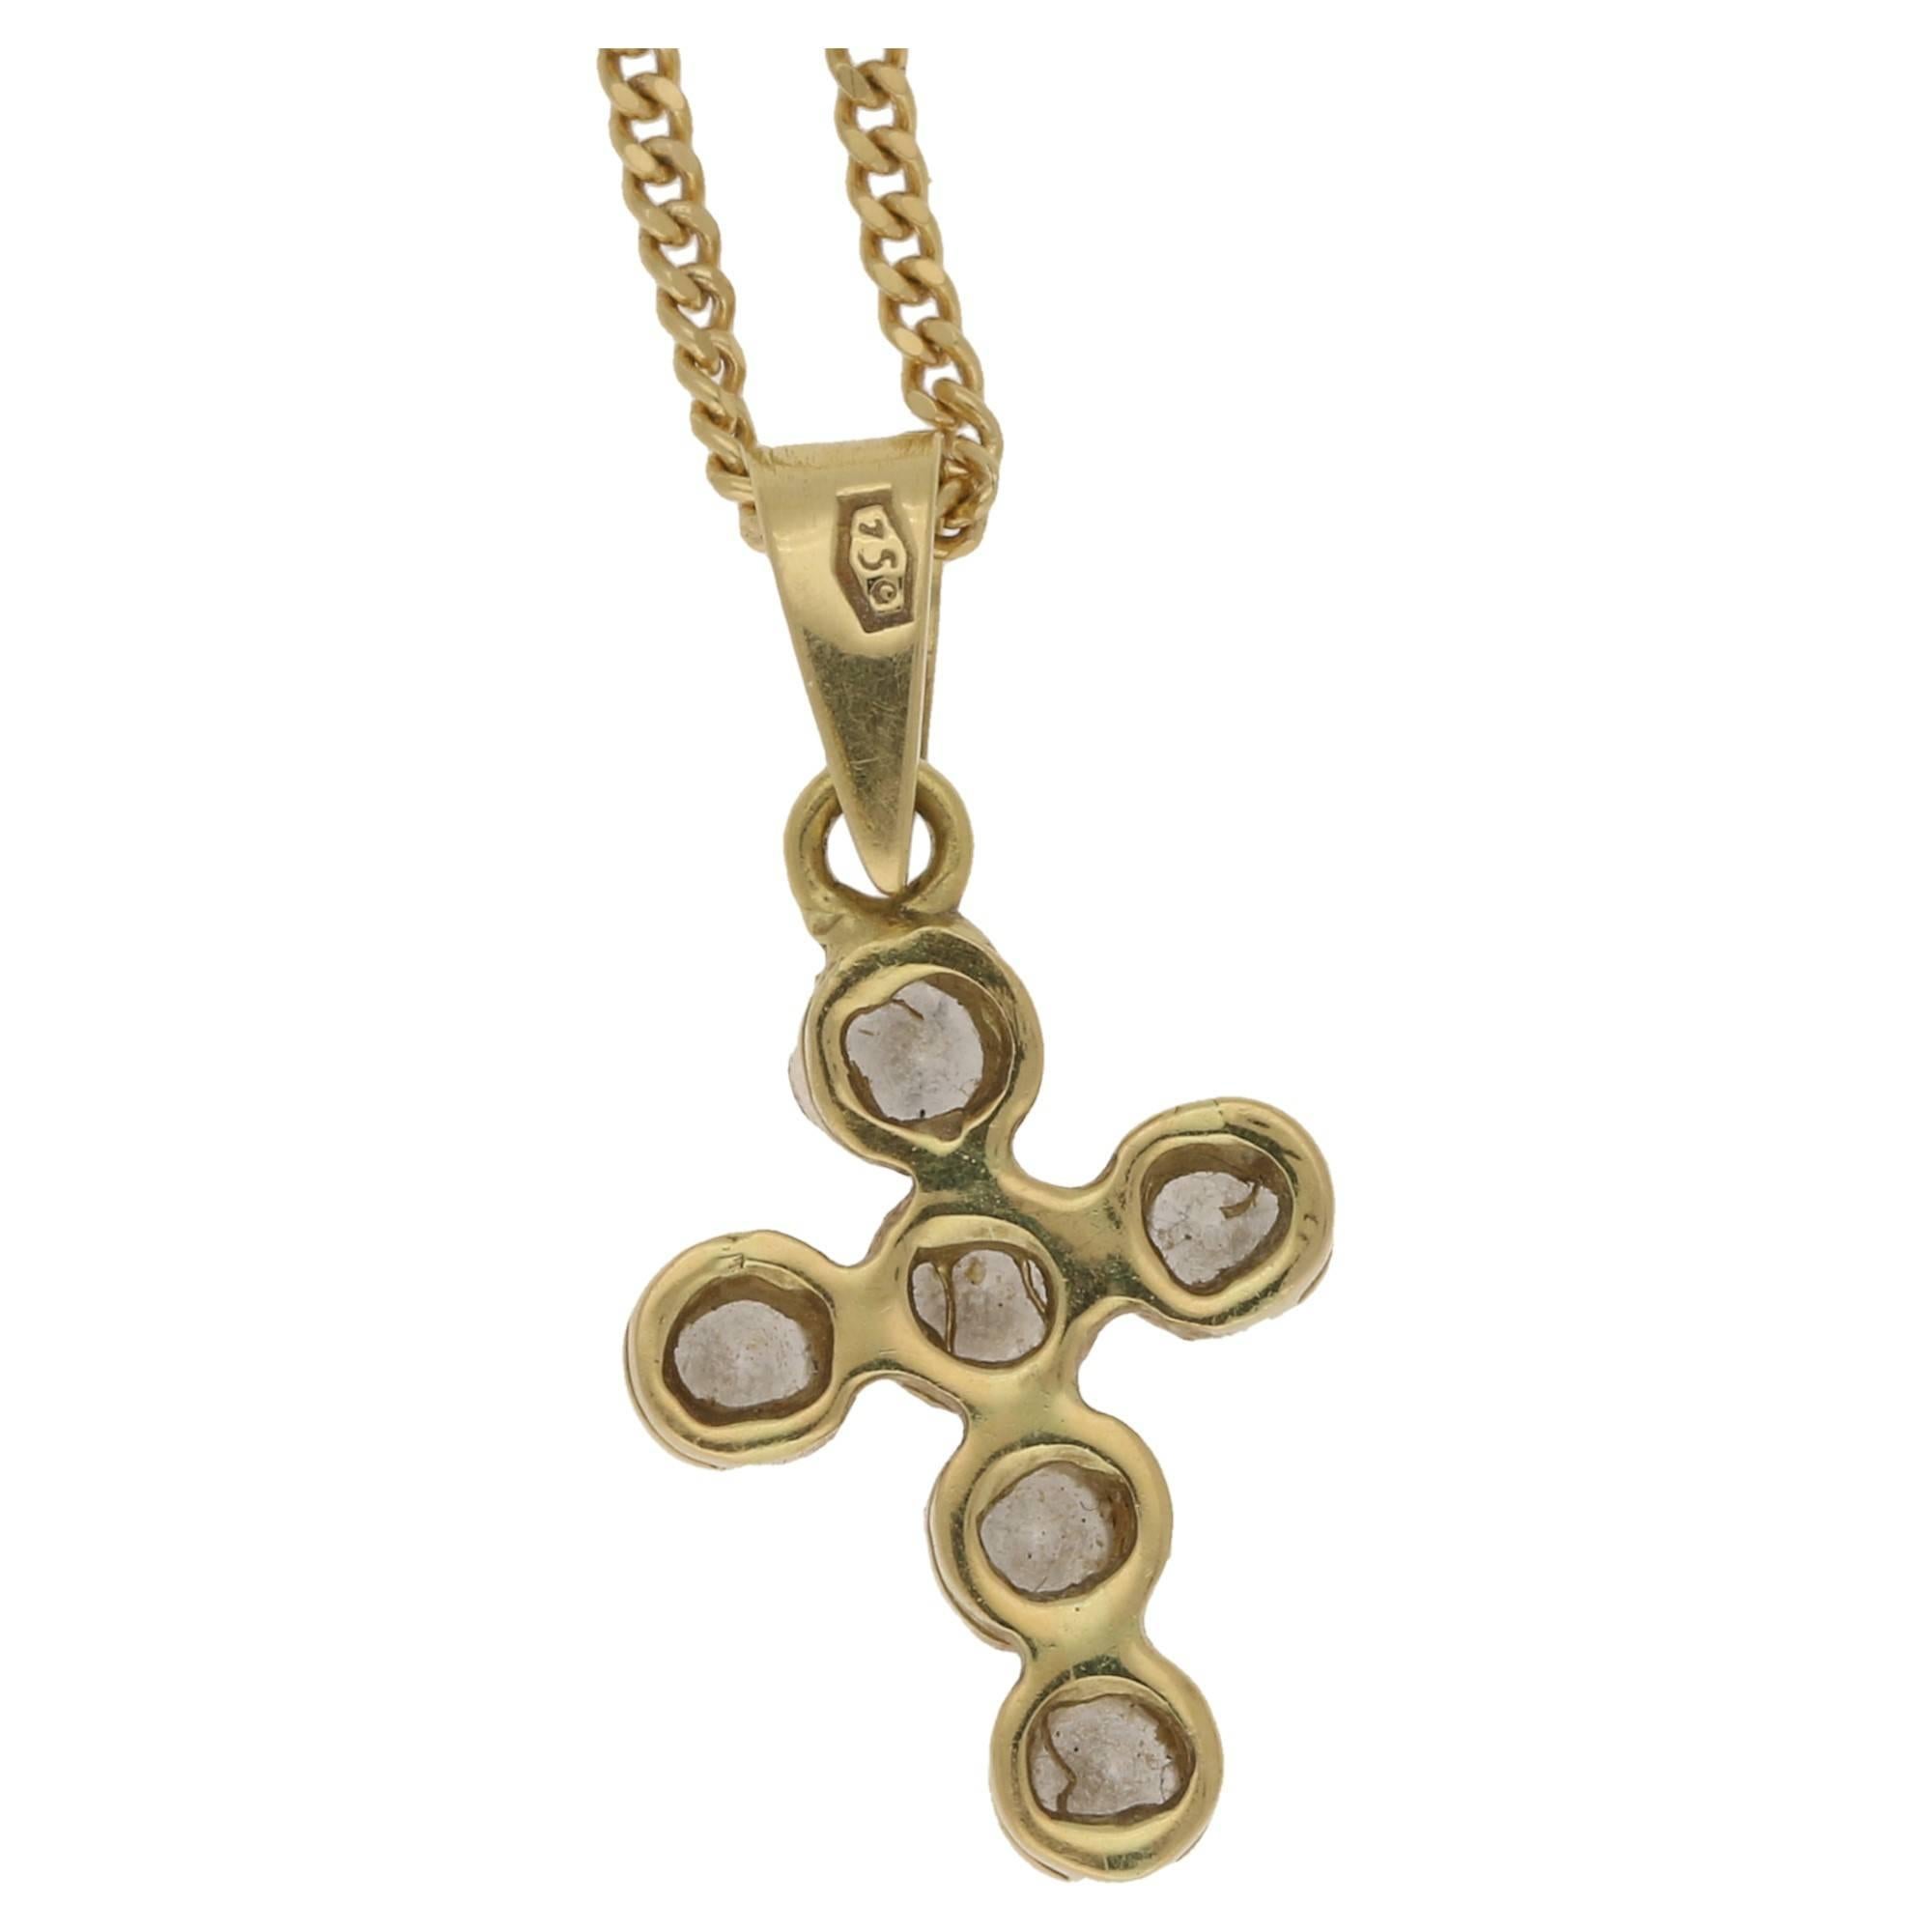 A diamond set cross pendant in 18 carat yellow gold. The cross is formed of six round brilliant cut diamonds tension set in 18 carat yellow gold/ the cross is attached to a pendant bail, affixed to an 18 carat yellow gold curb link chain. Estimated